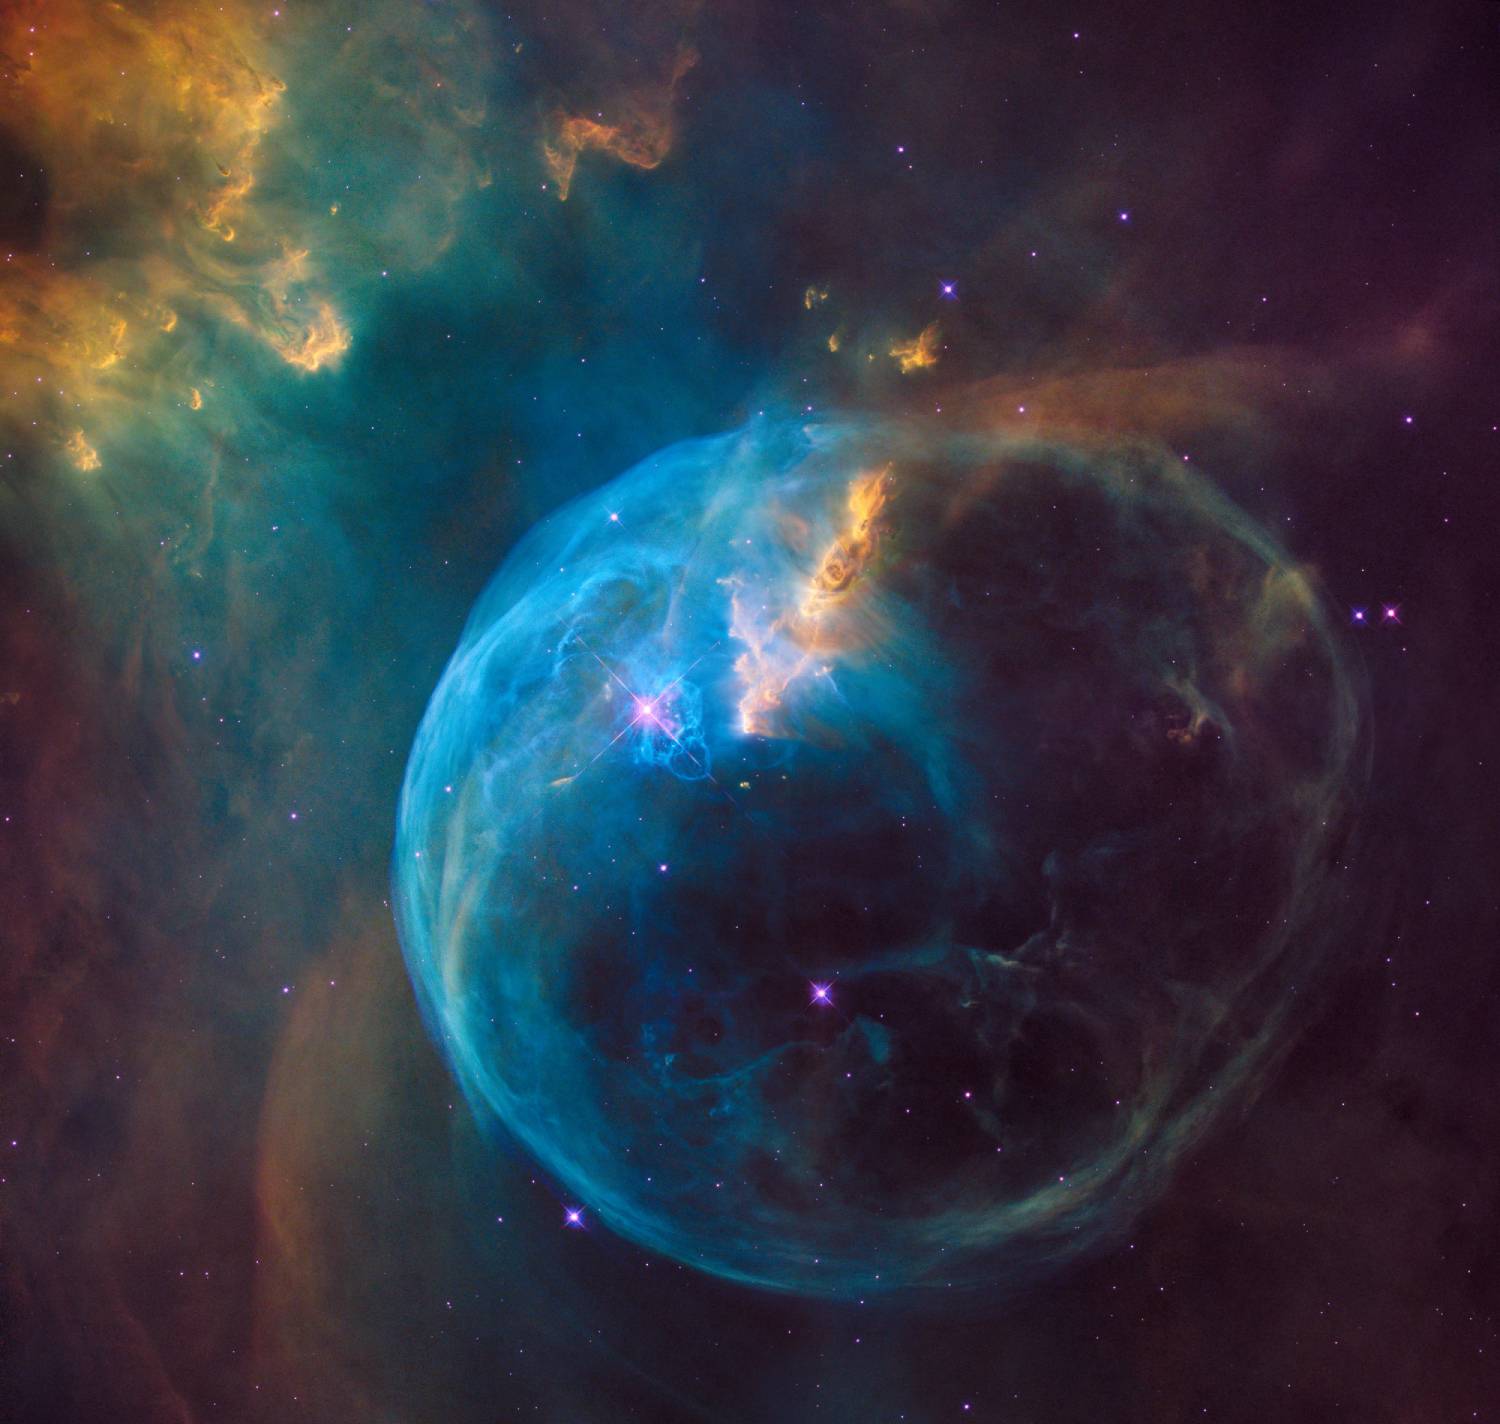 A large blue space bubble in outer space